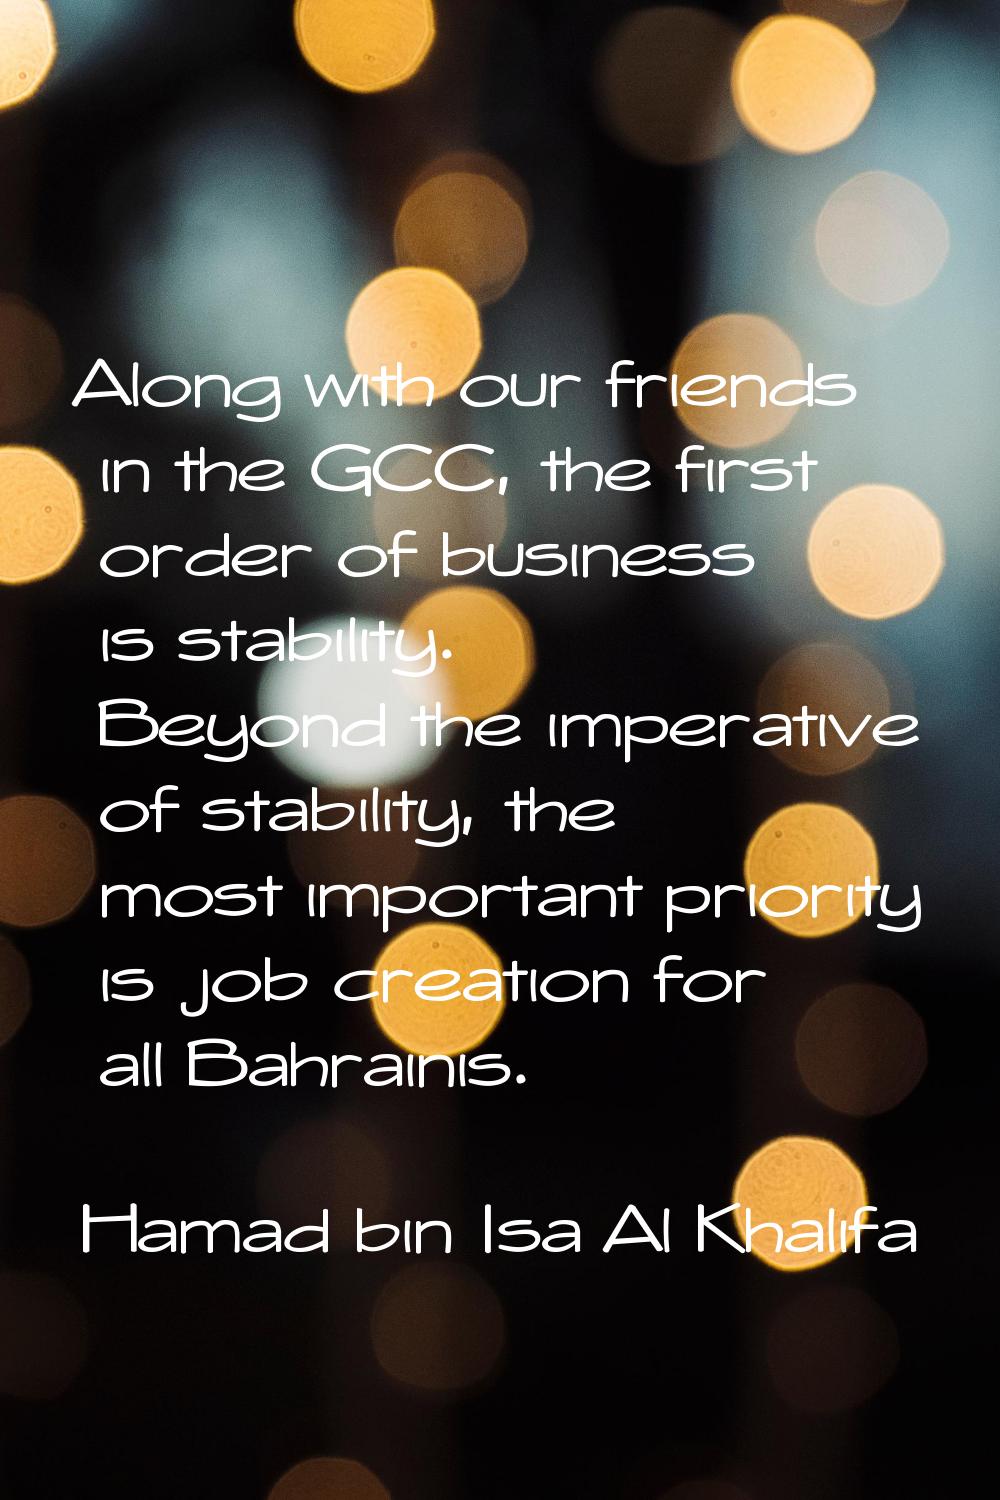 Along with our friends in the GCC, the first order of business is stability. Beyond the imperative 